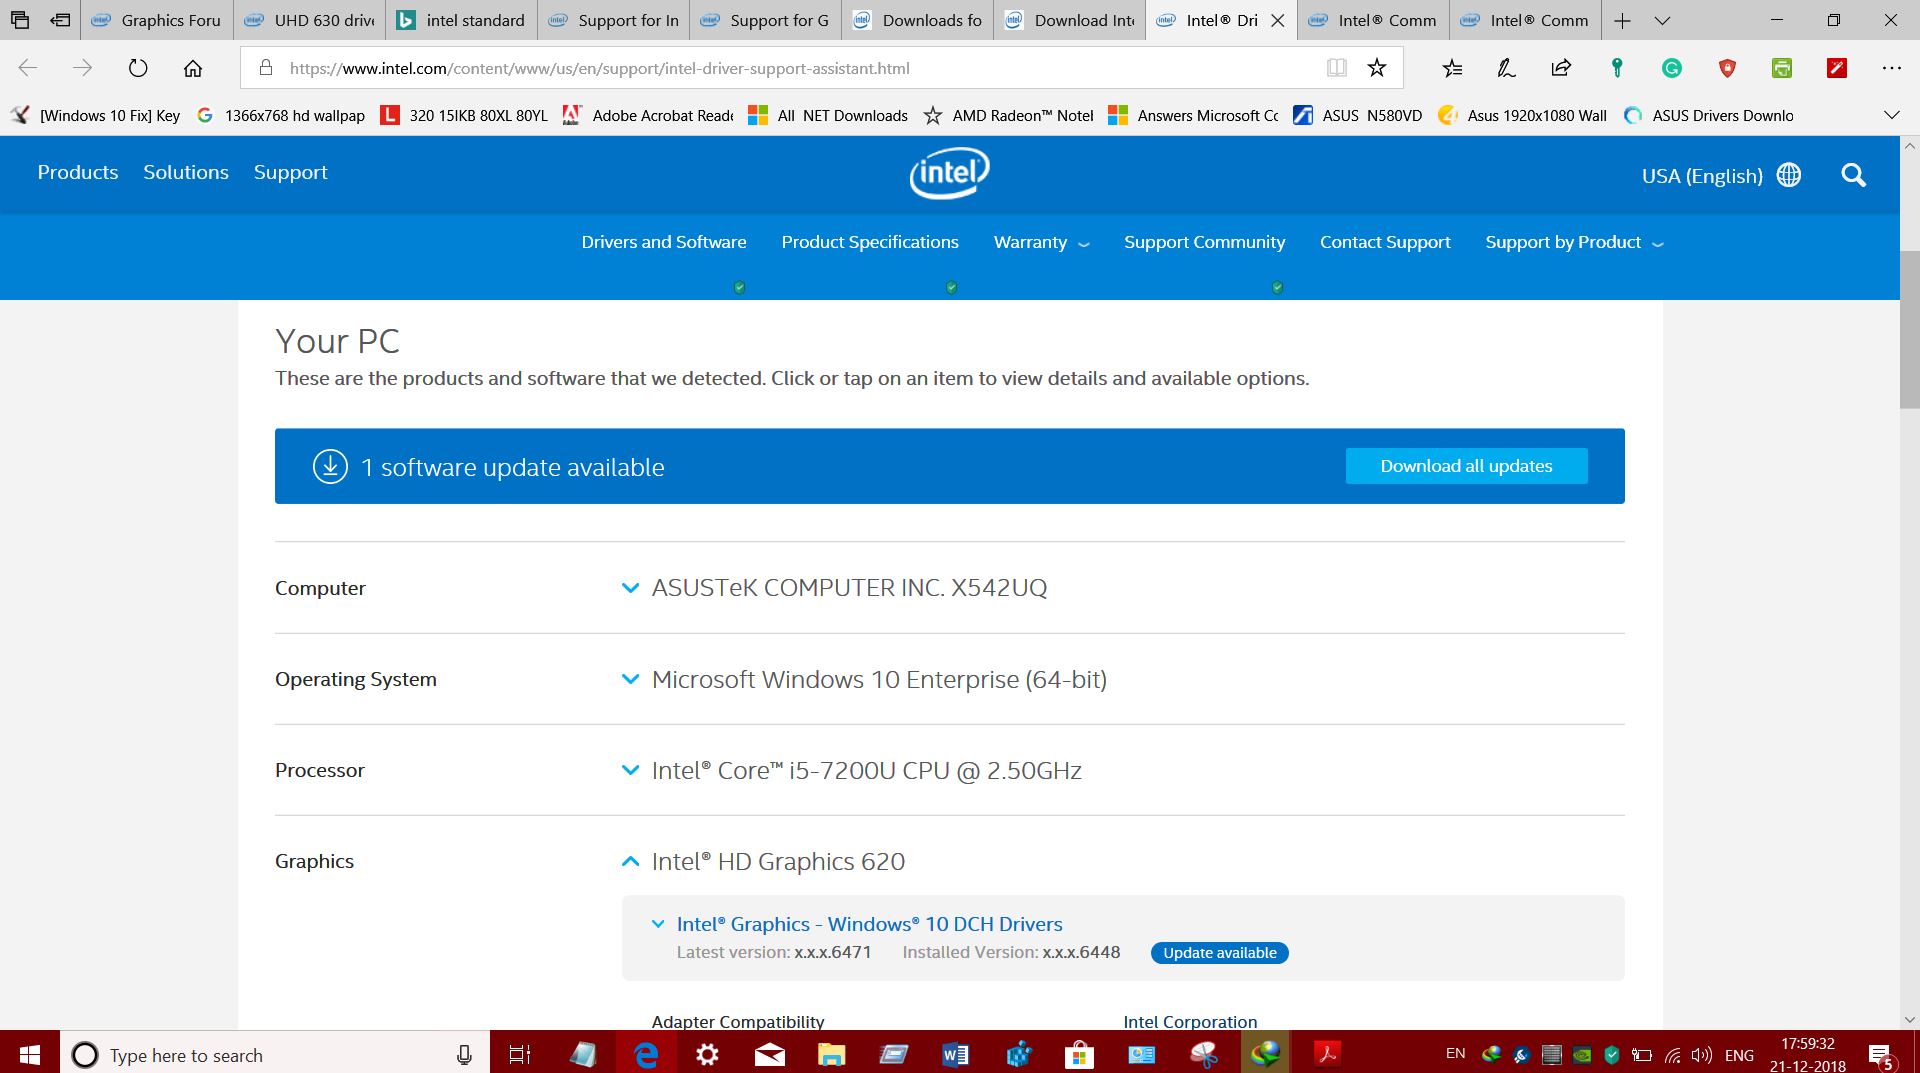 INTEL RELEASED STABLE GRAPHICS DRIVER DCH_WHQL_25.20.100.6519 FOR WINDOWS 10 64 BIT ON... e6cbc62a-ce62-45c3-9aef-e617bd66bd24?upload=true.jpg